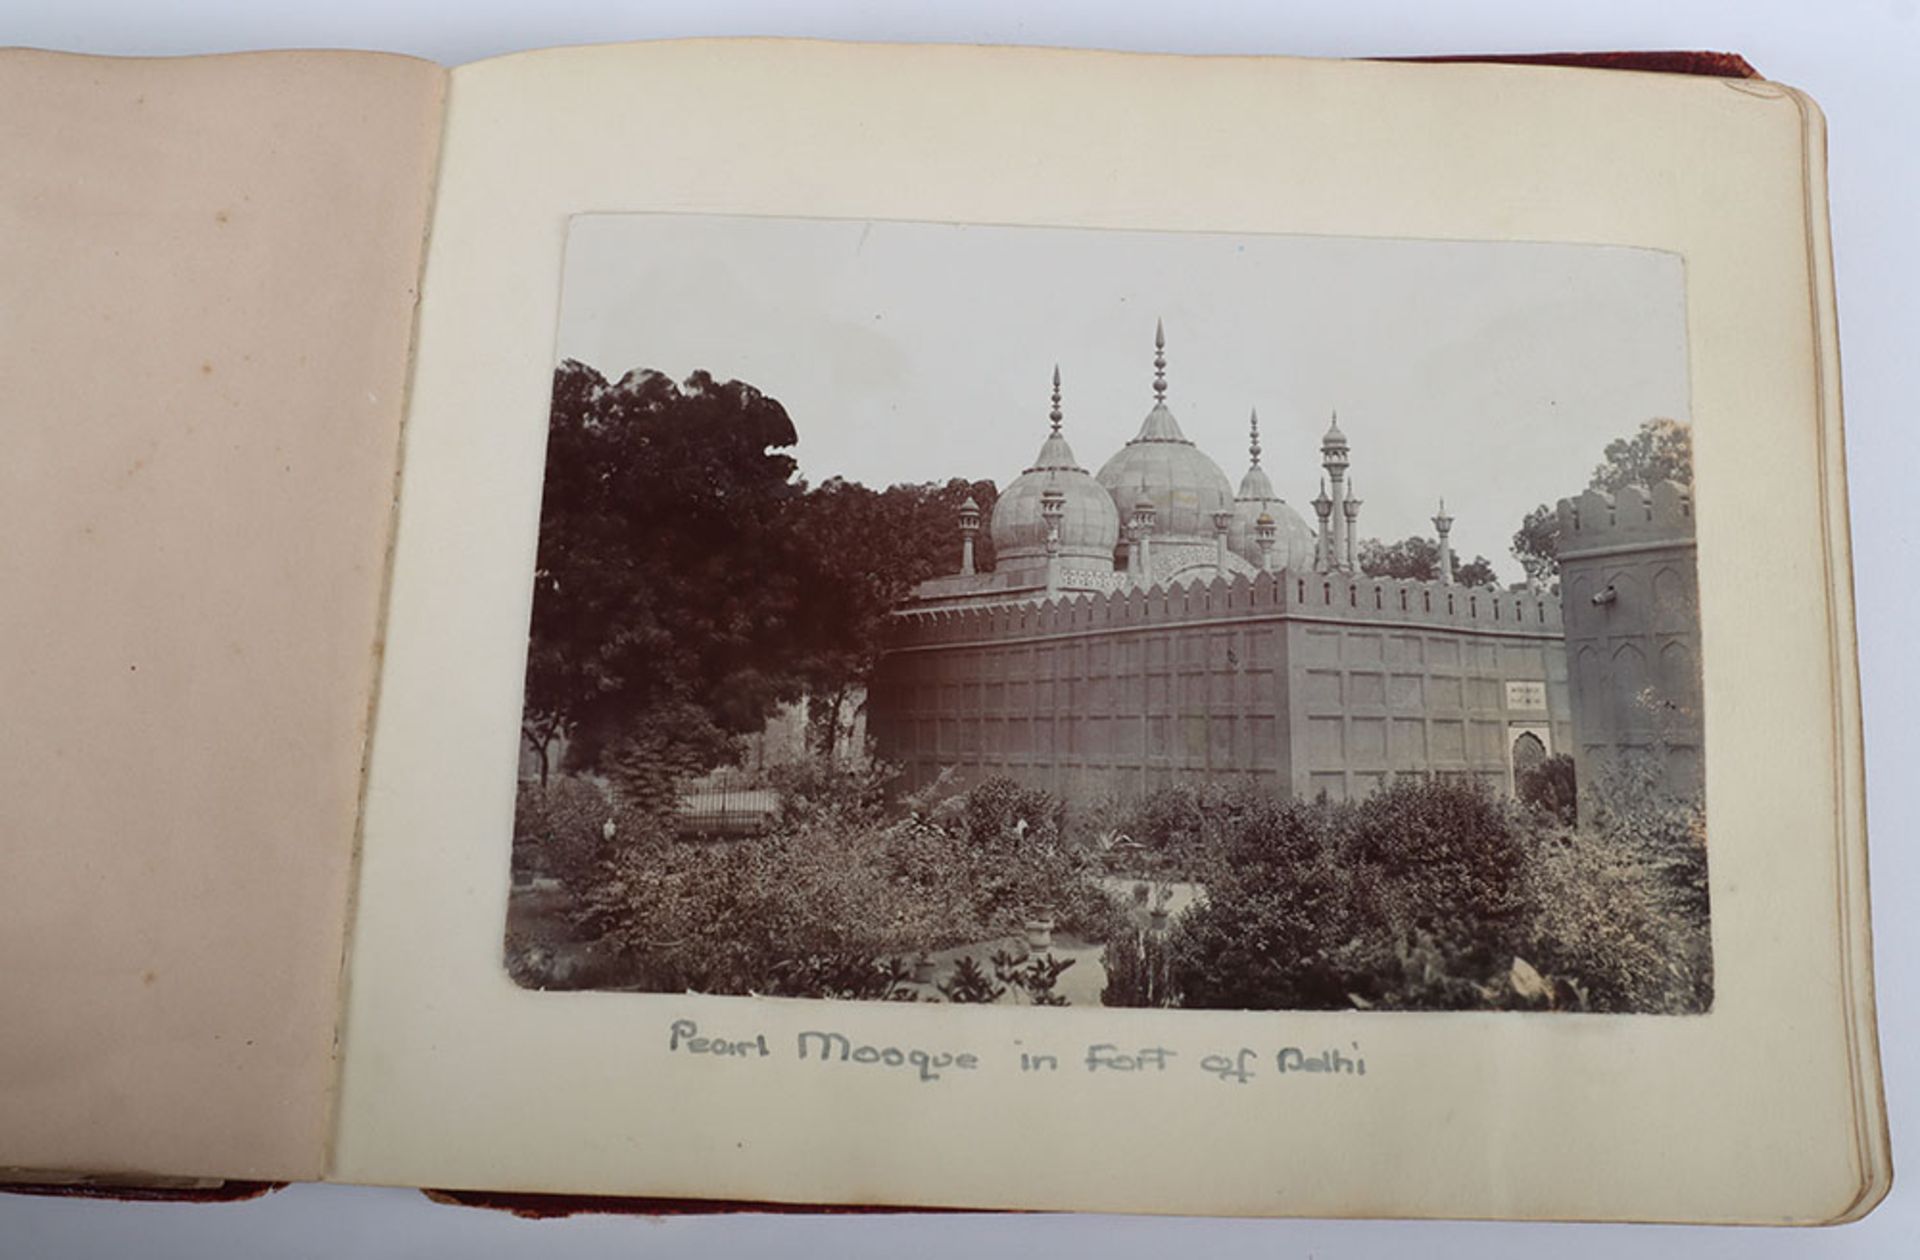 Photograph Album with images of ther Delhi Durbar, troops lining streets, Elephants, sacred cows bel - Image 30 of 48